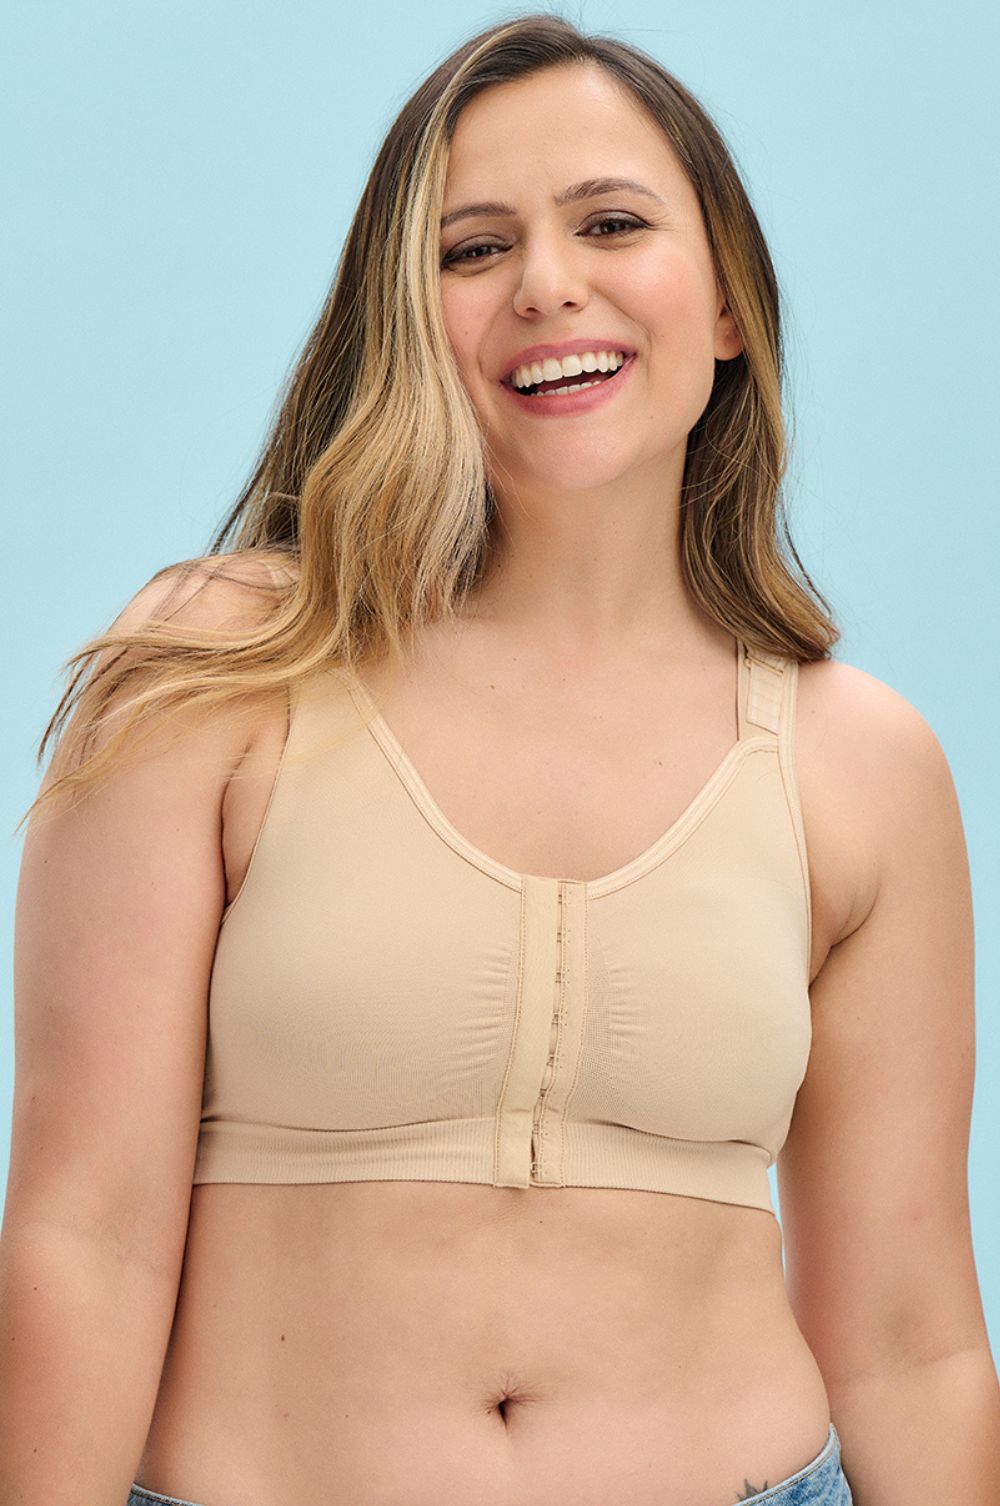 A Bra To Support Those Taking The Next Step In Their (Recovery